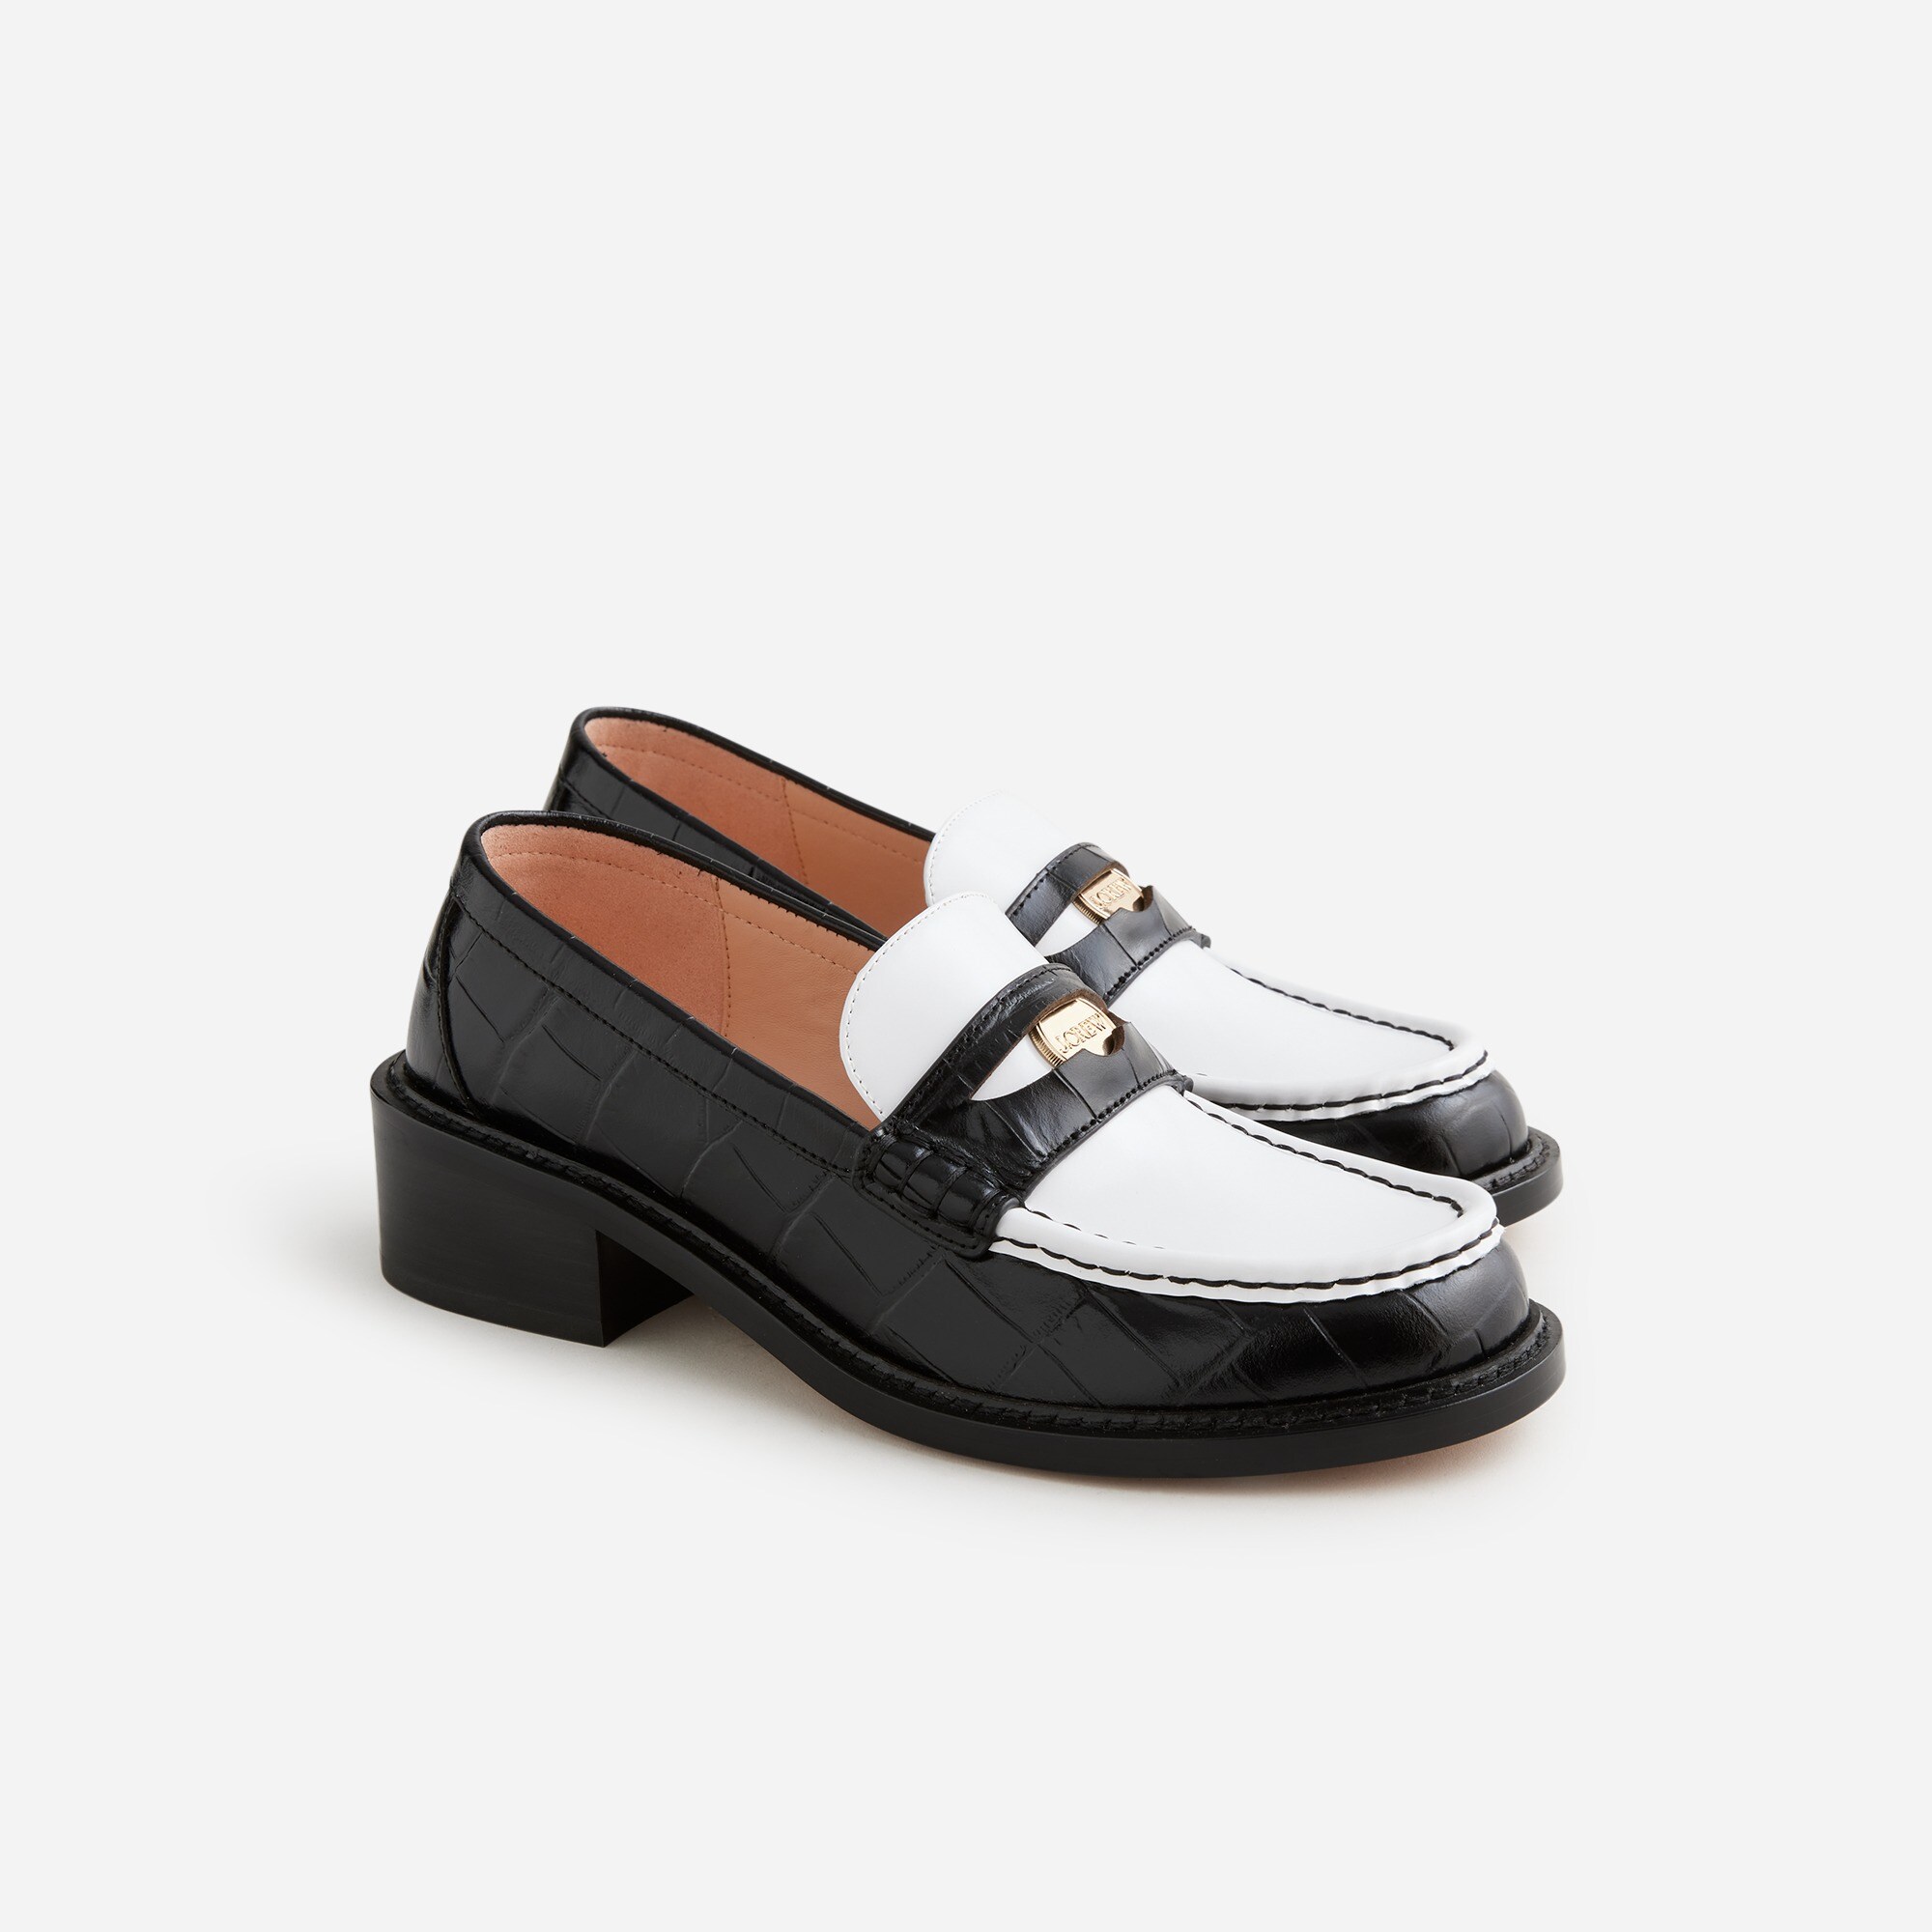  Coin loafers in croc-embossed leather